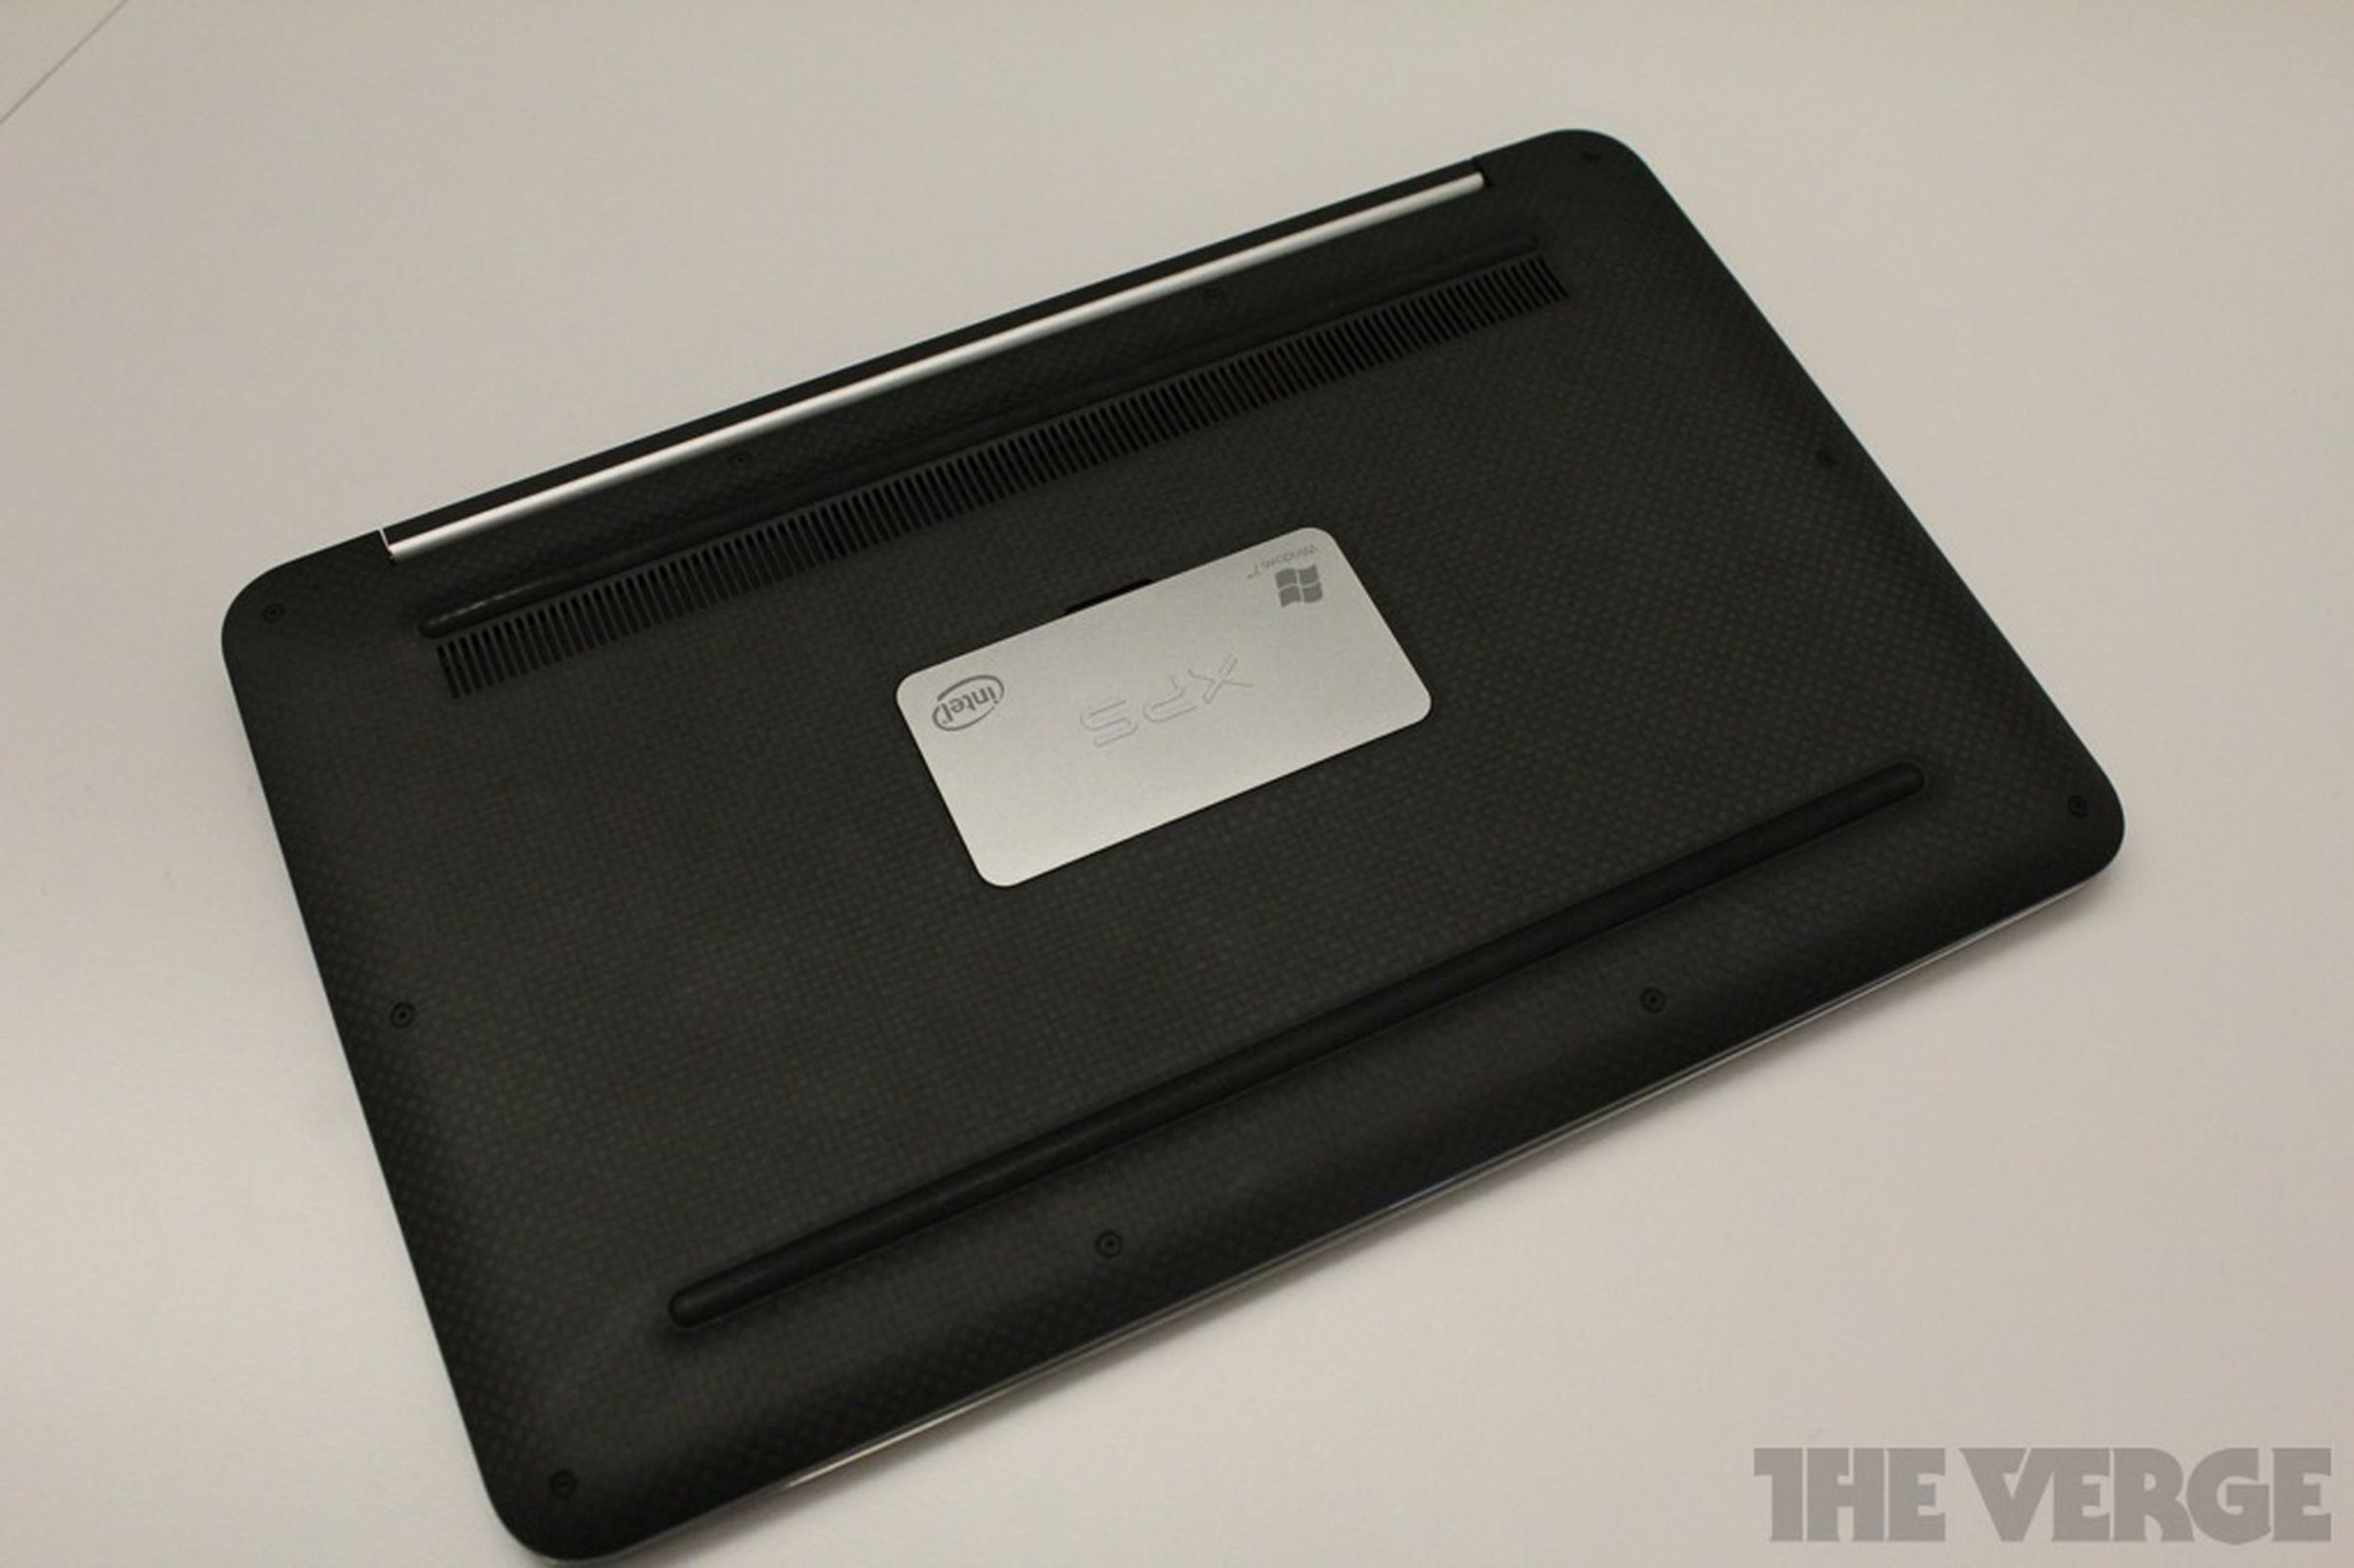 Dell XPS 13 ultrabook hands-on pictures 